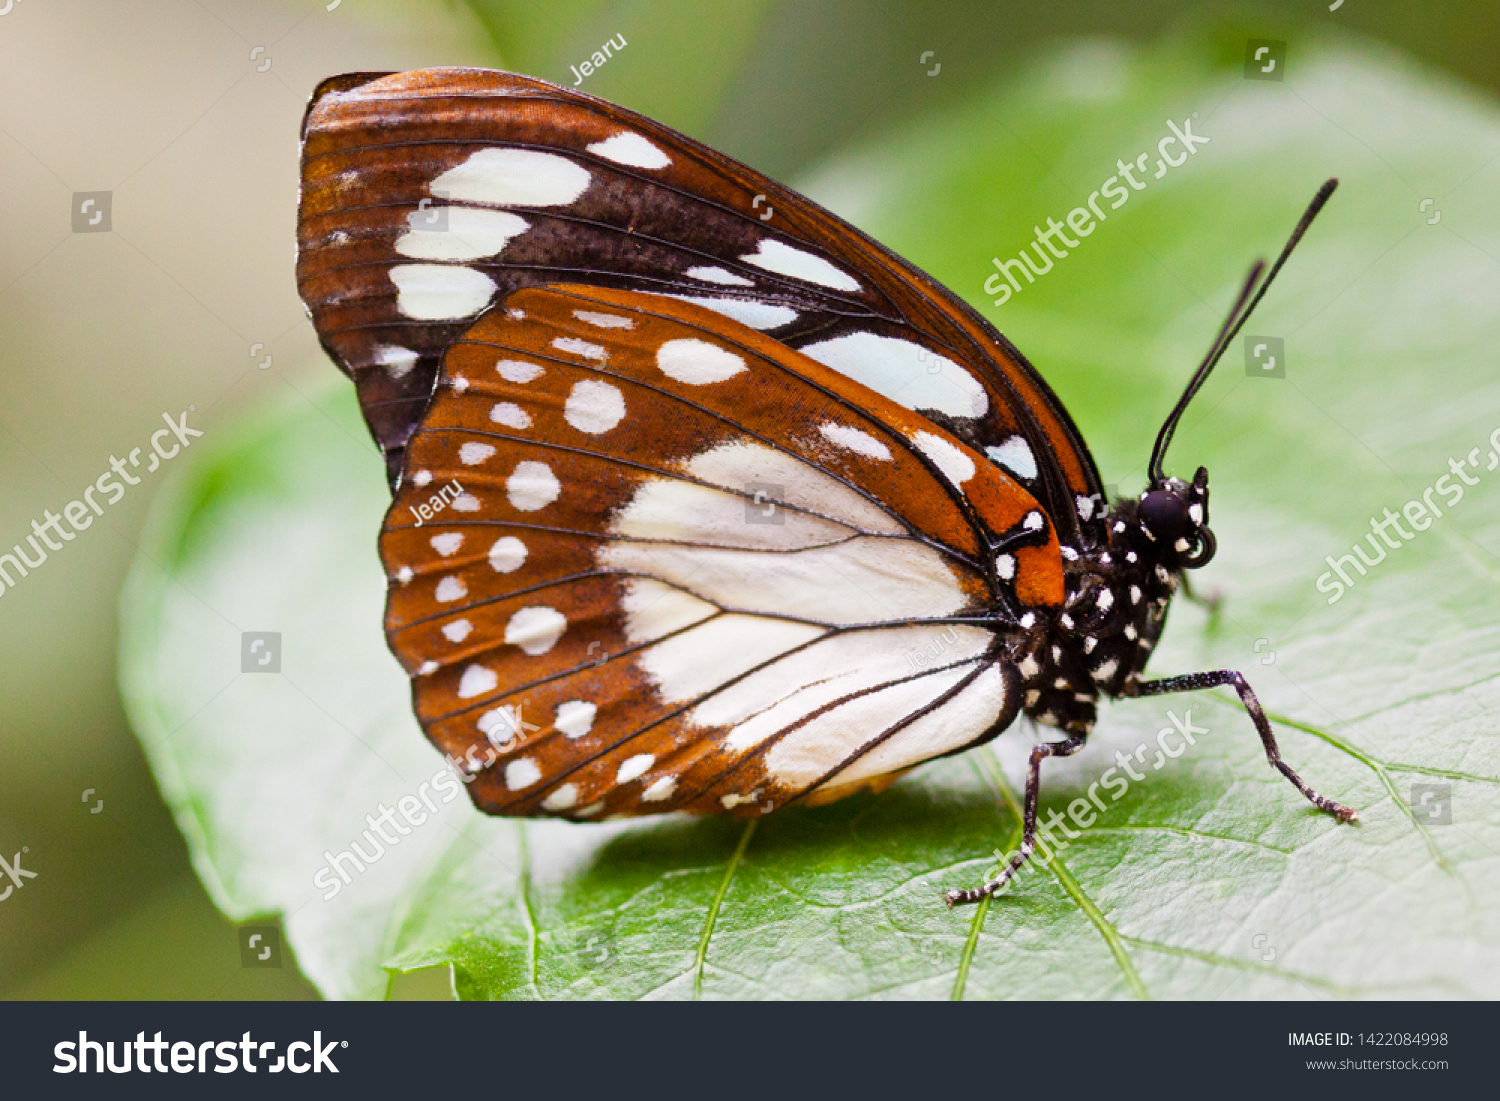 Bộ sưu tập cánh vẩy 4 - Page 24 Stock-photo-common-forest-queen-euxanthe-eurinome-1422084998